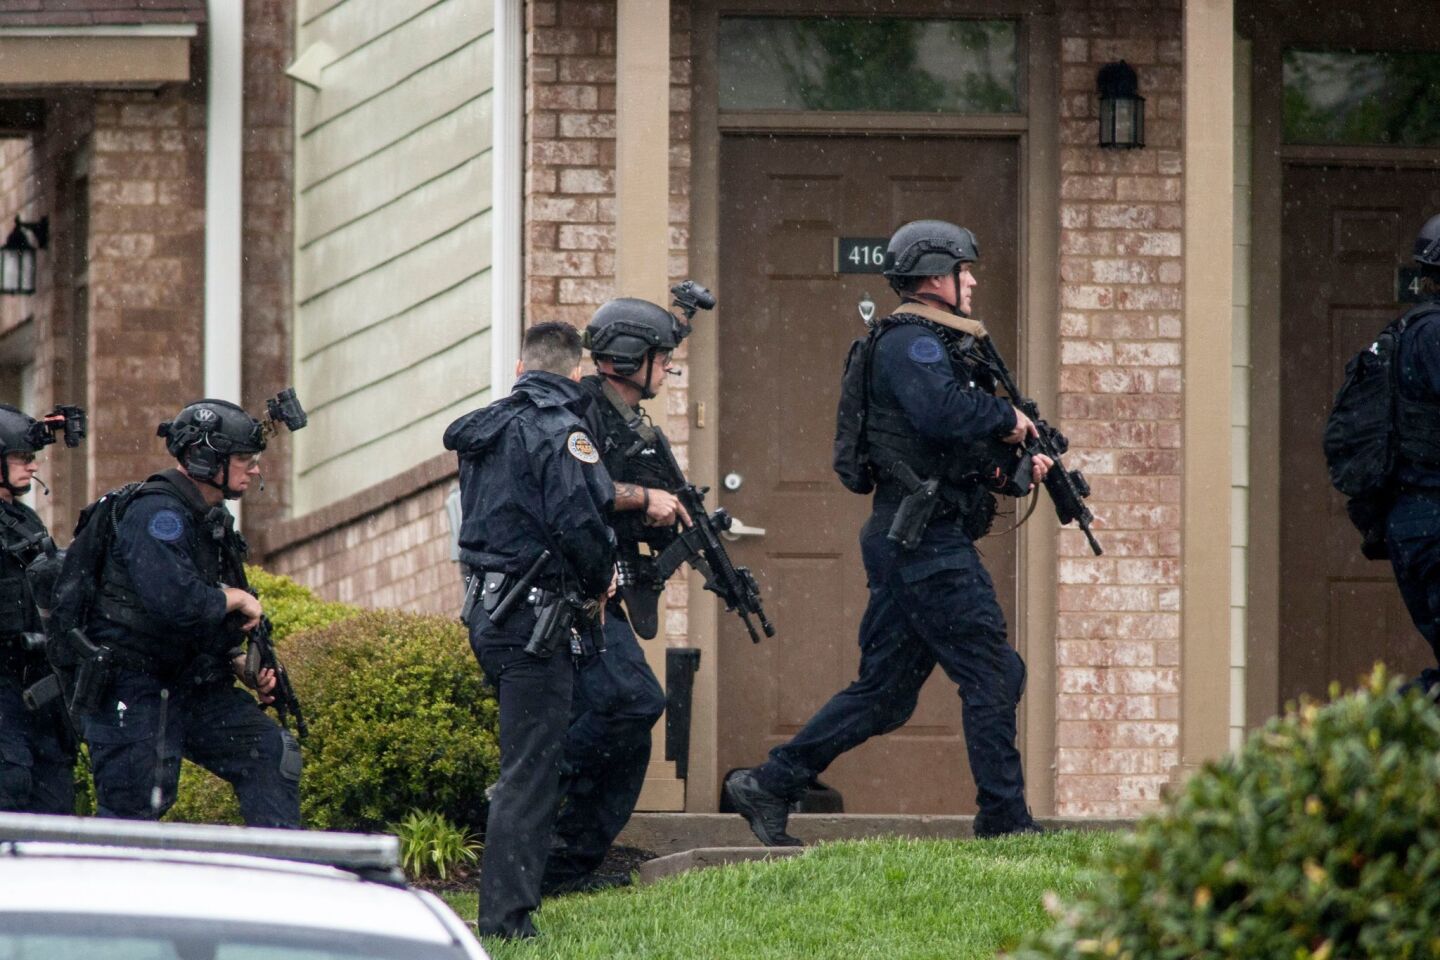 Metro Nashville Police use a SWAT team and bomb squad to serve a search warrant at the apartment of the suspected gunman who opened fire with an assault rifle at a Waffle House restaurant in Nashville.